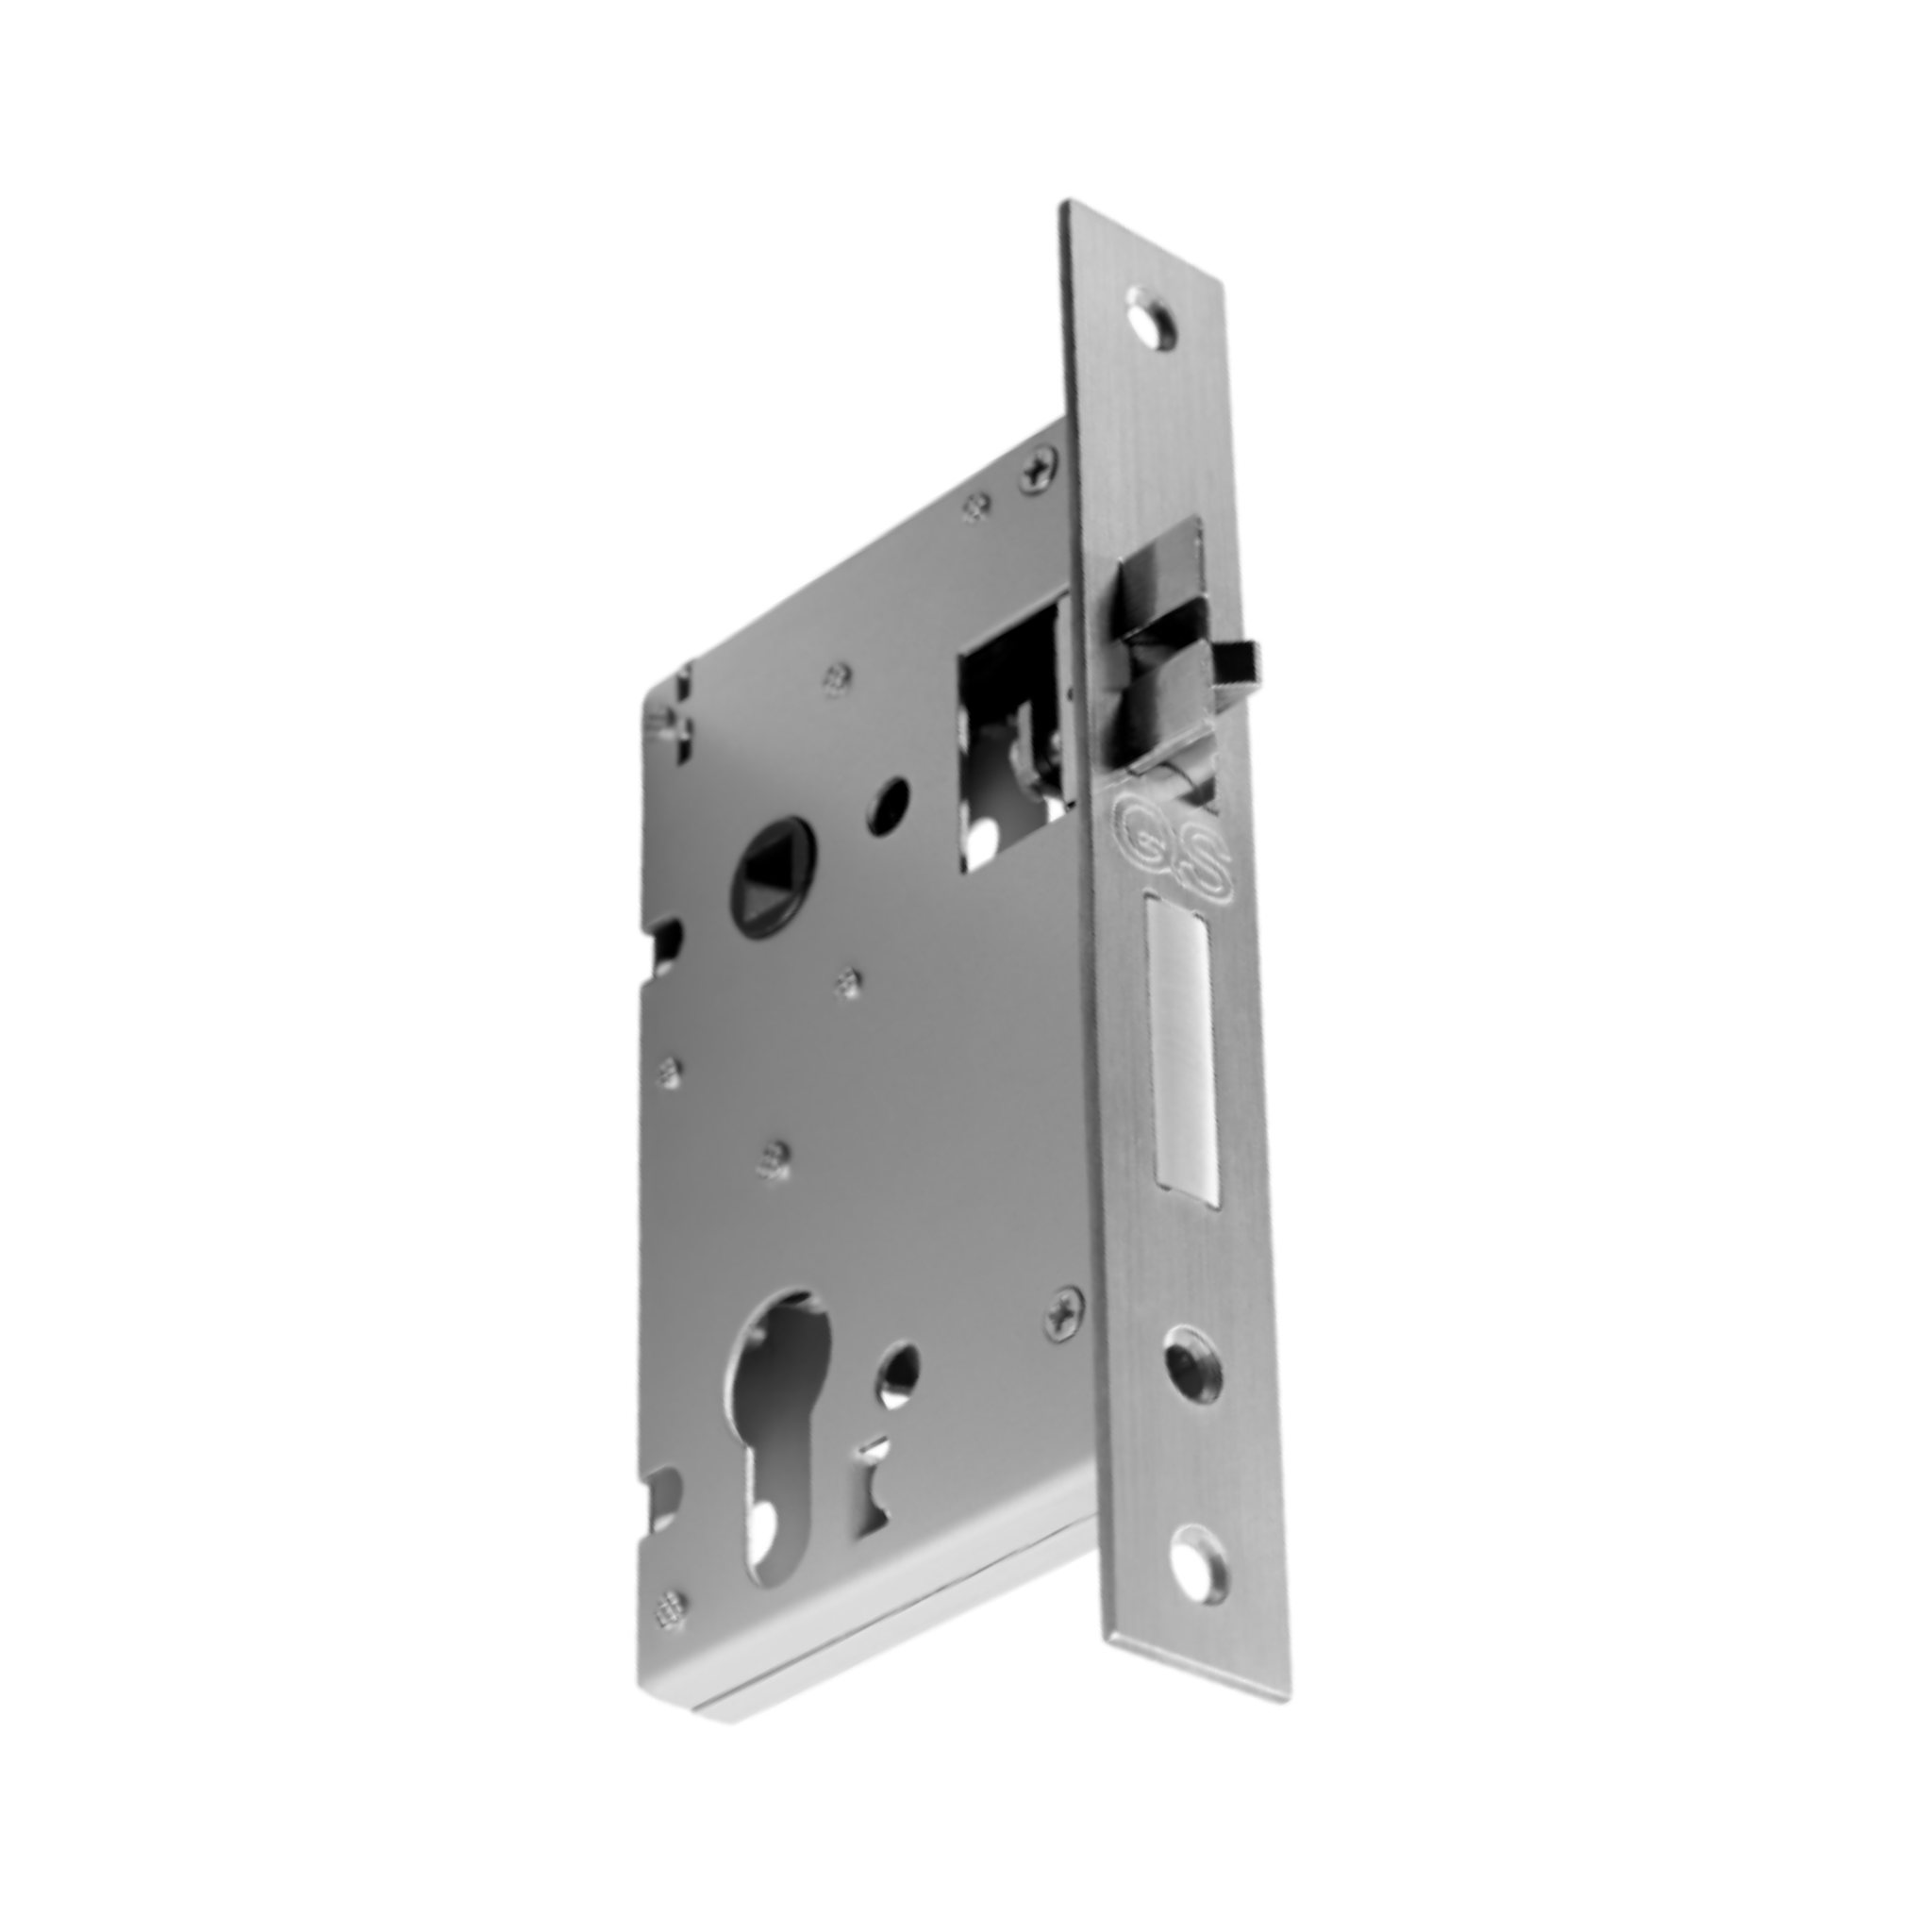 QS6055/1/SS, Latch & Deadbolt Lock, Euro Cylinder, Excluding Cylinder, 55mm (Backset), 60mm (ctc), Stainless Steel, QS